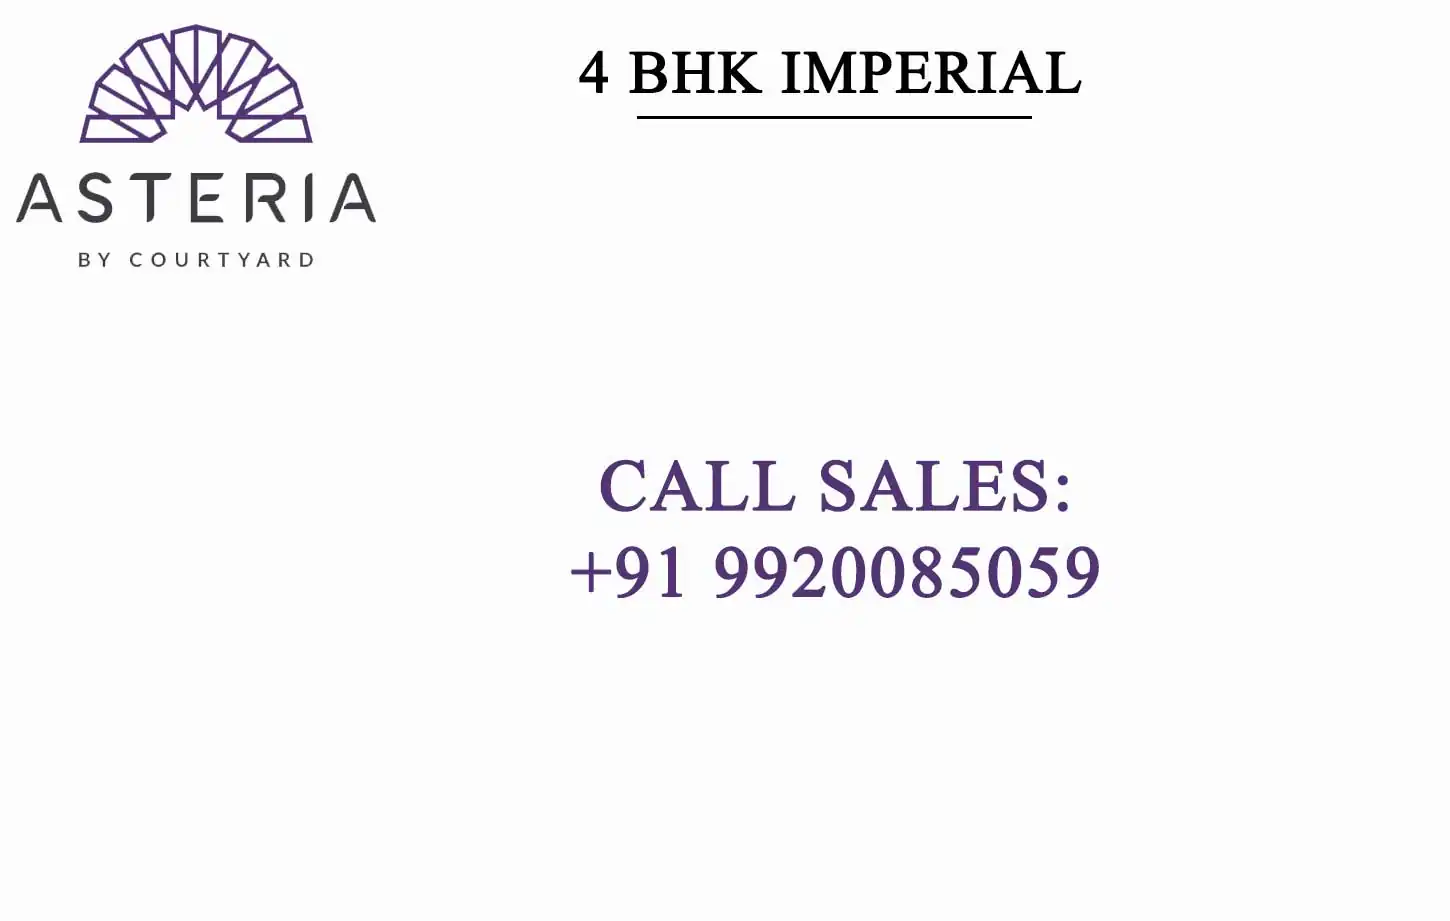 Courtyard Asteria 4BHK Imperial Residence